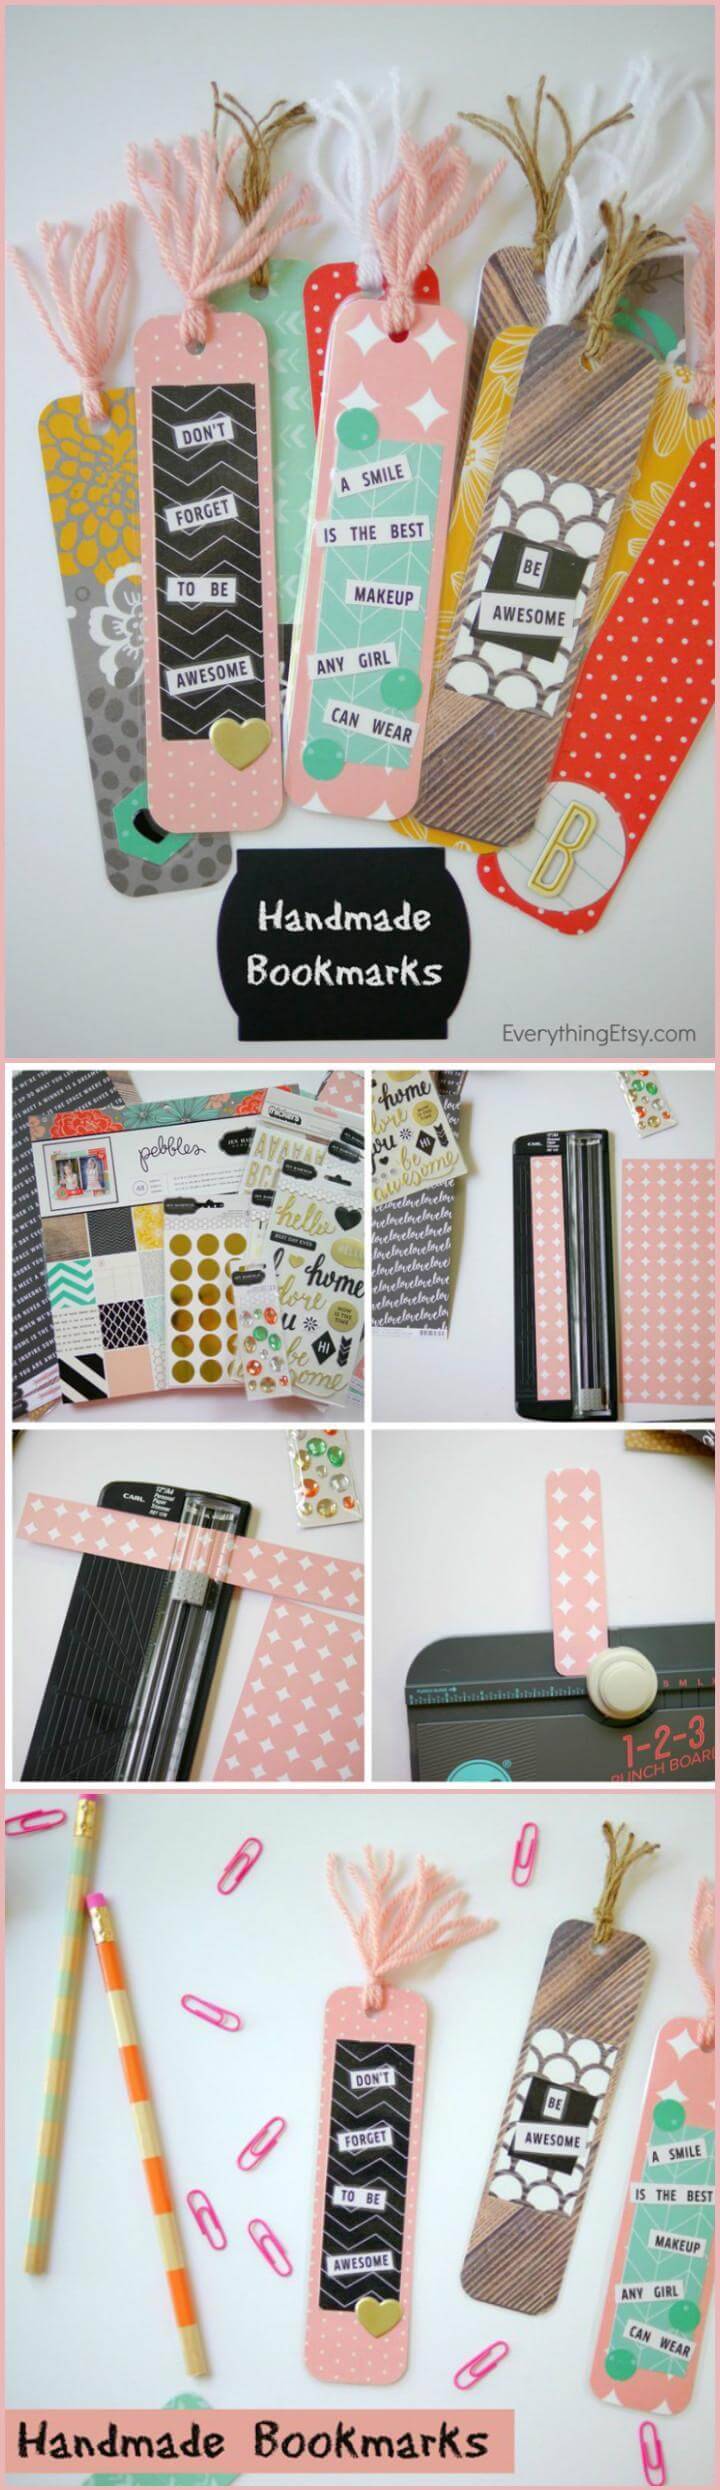 self-made easy bookmarks